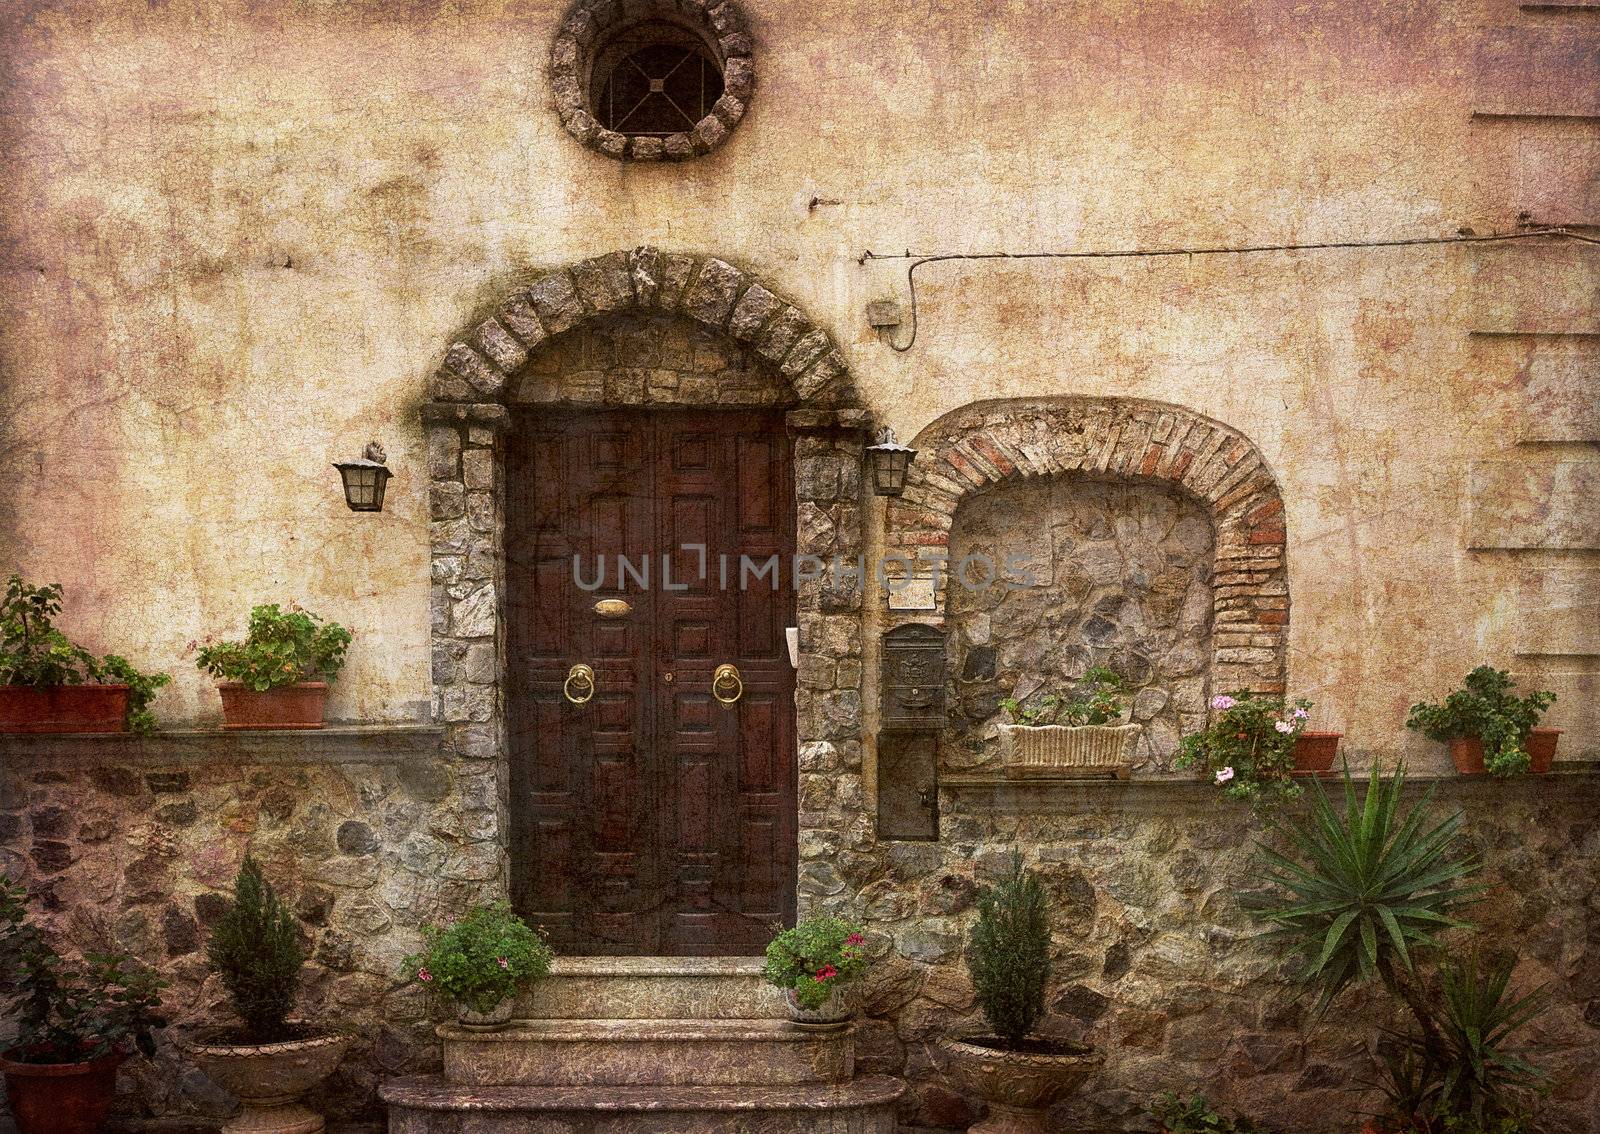 Beautiful village entrance - postcard from Italy. More of my images worked together to reflect age and time.